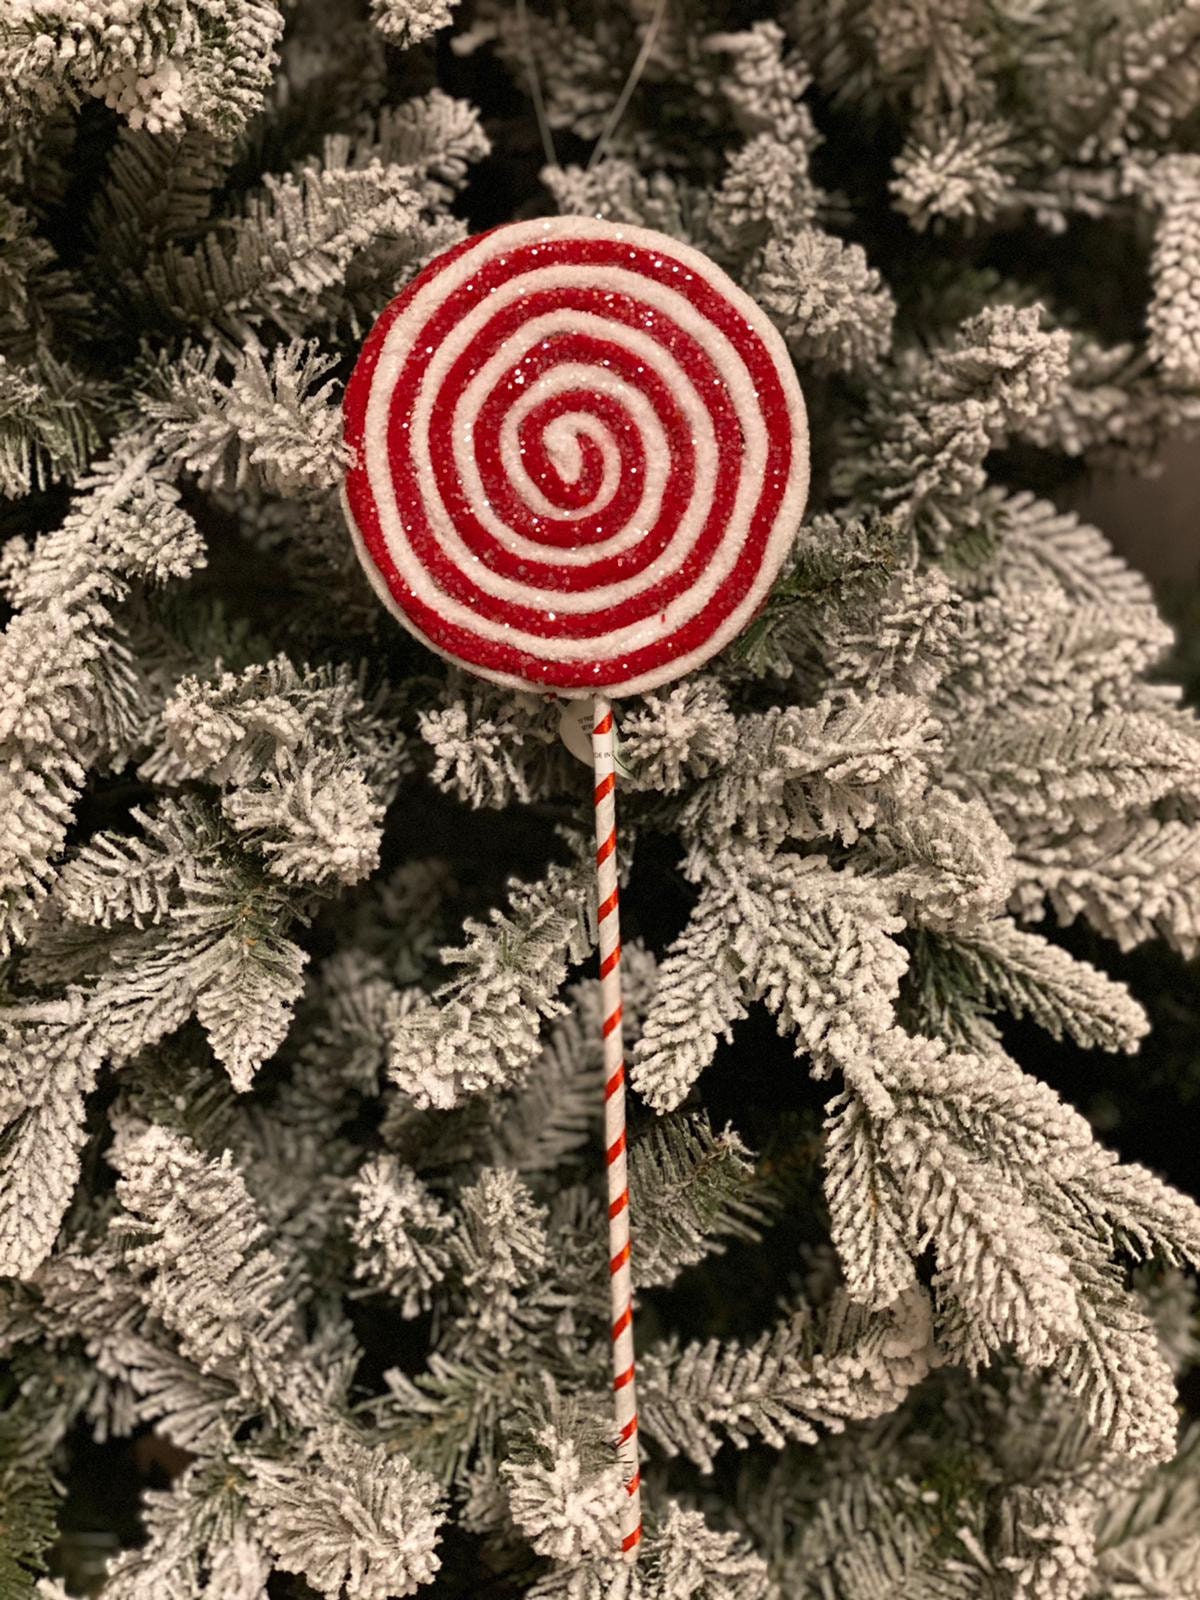 15" frosted felt lollipop pick, red, white